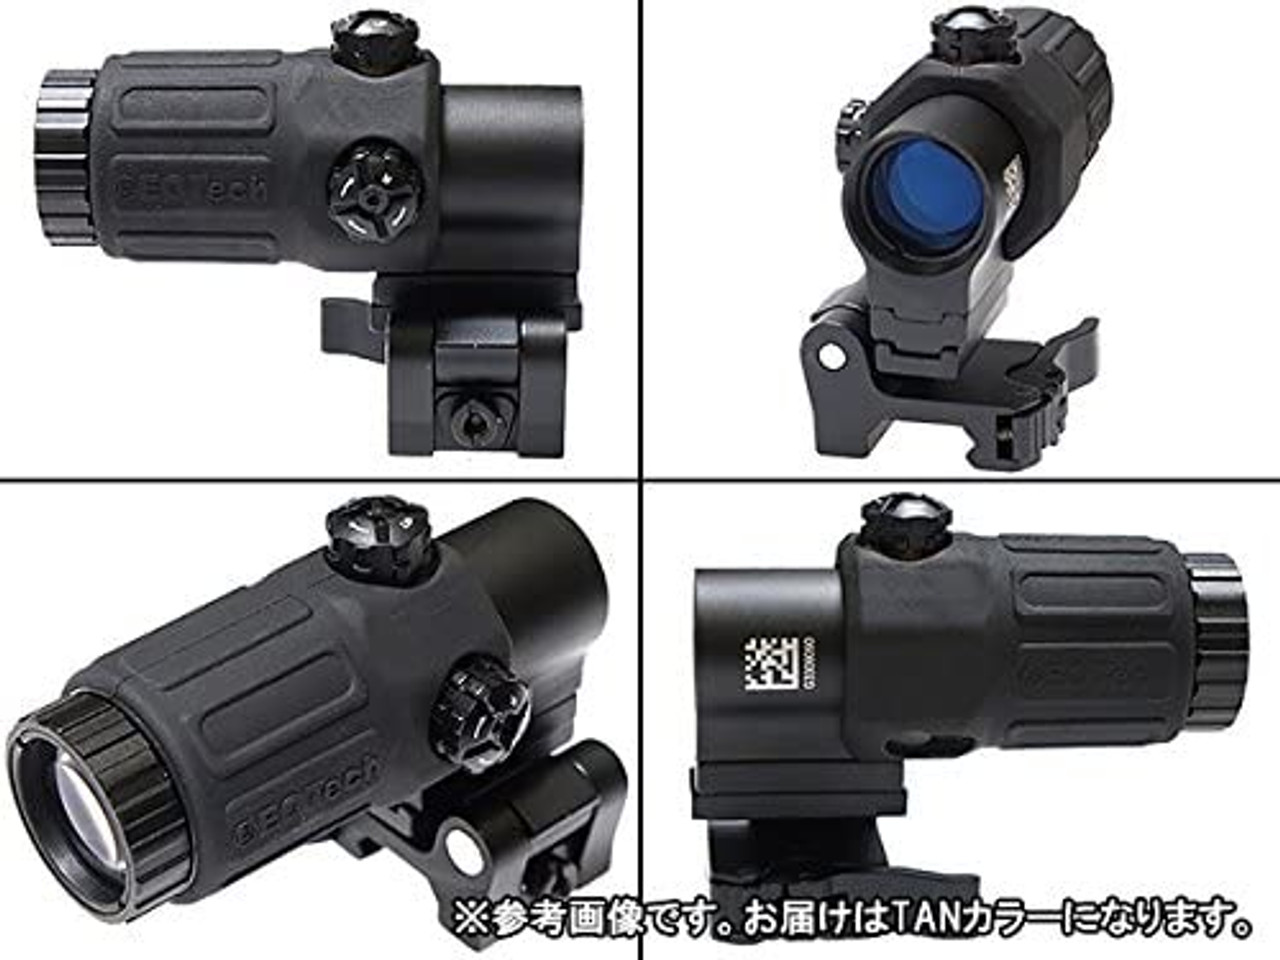 NB [EoTech Type] G33 STS Magnifier / 3.25x TAN Replica (Latest  Magnification Booster Scope) - Airsoft Shop Japan